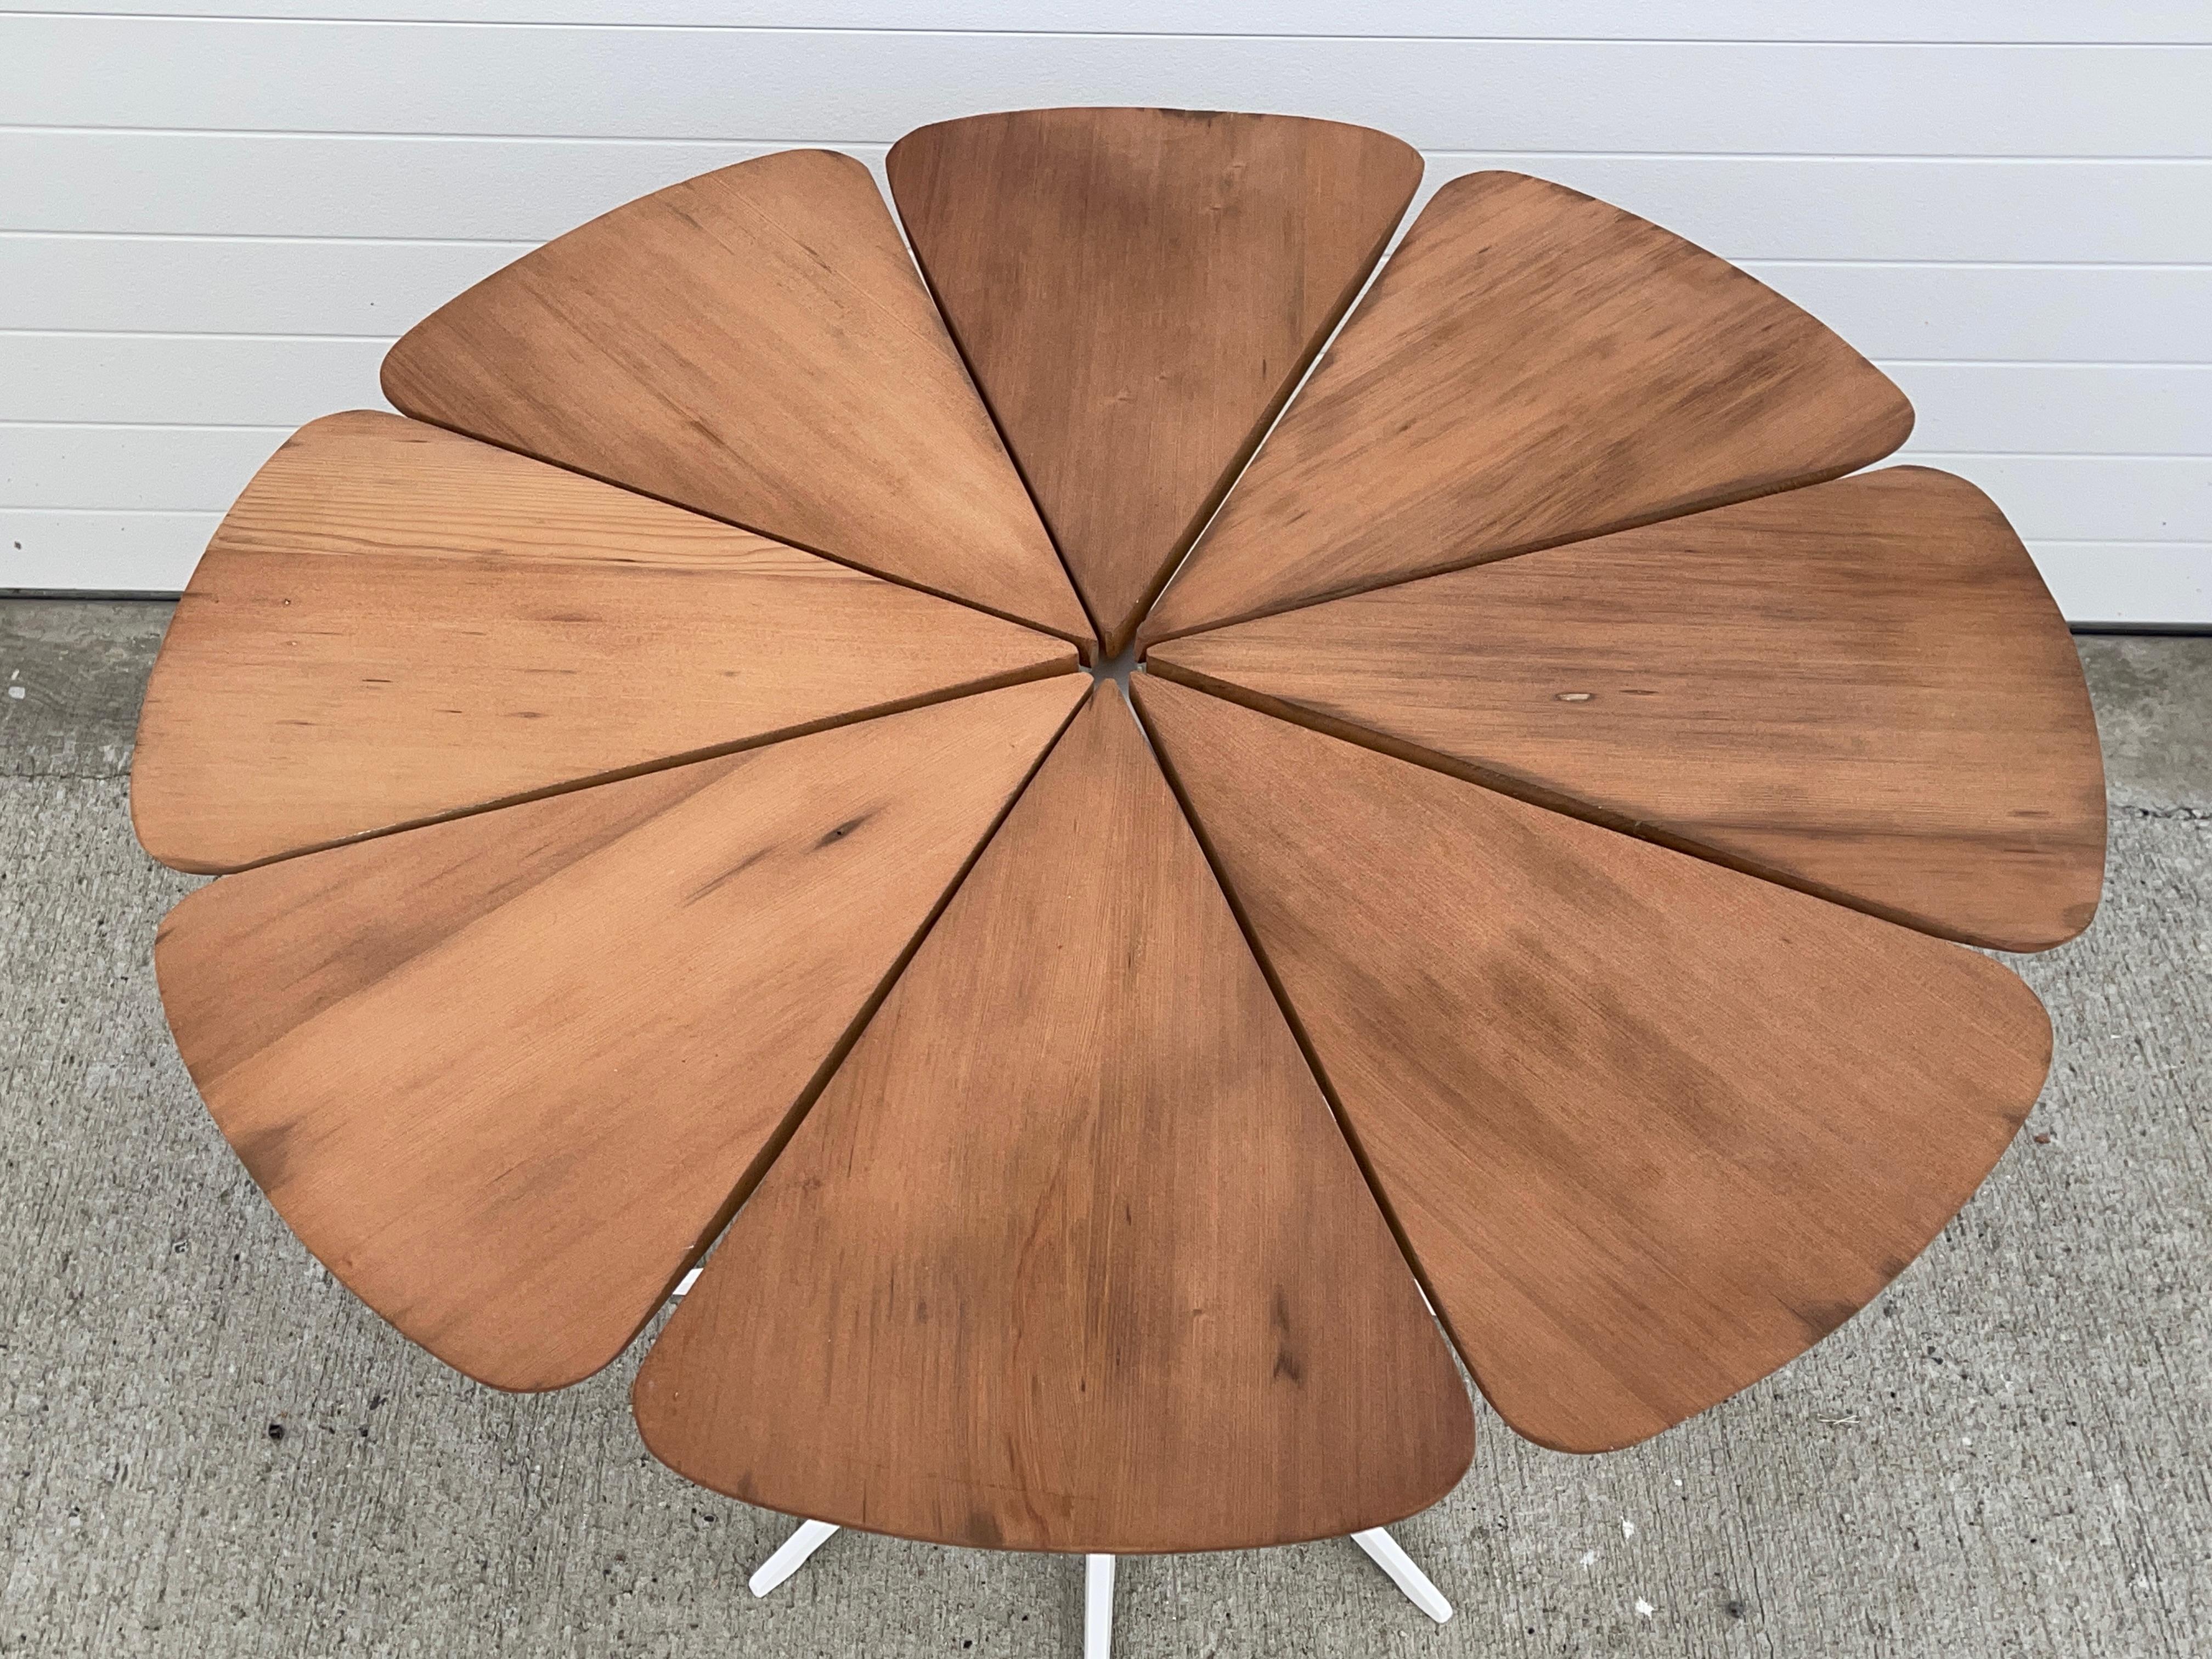 American 1961 Petal Dining Table by Richard Schultz for Knoll in California Redwood For Sale